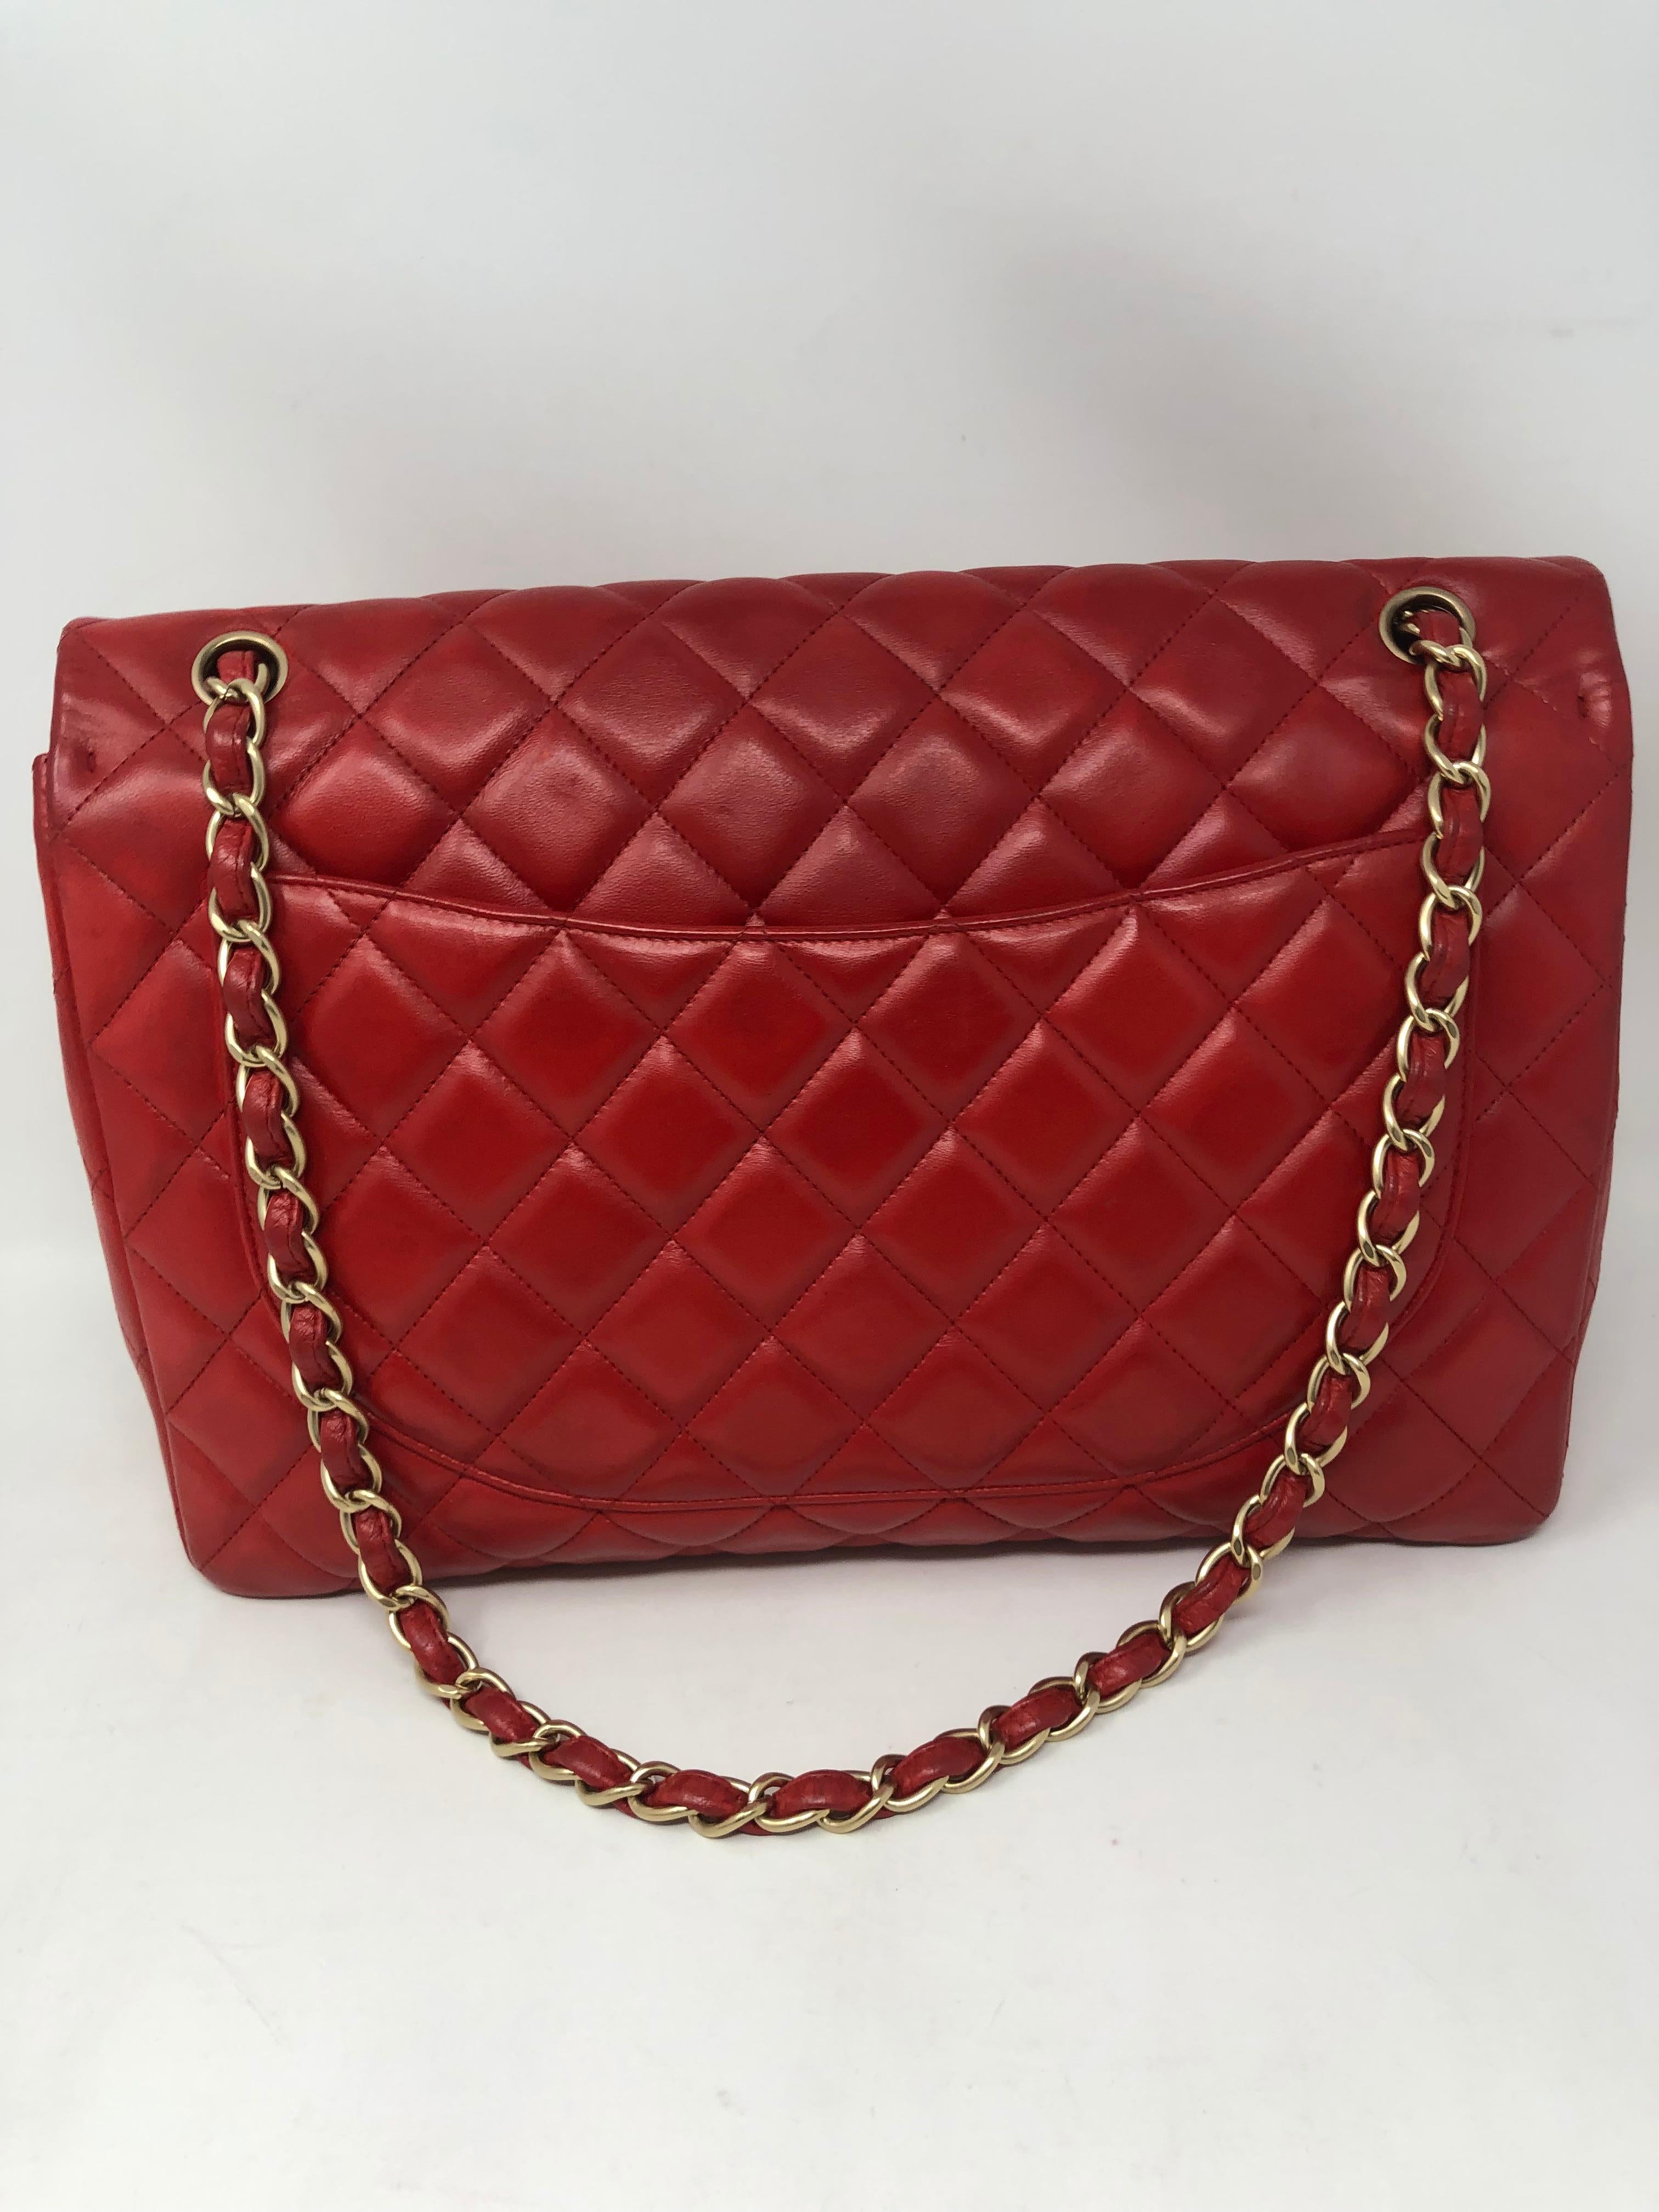 Chanel Red Maxi Bag 2